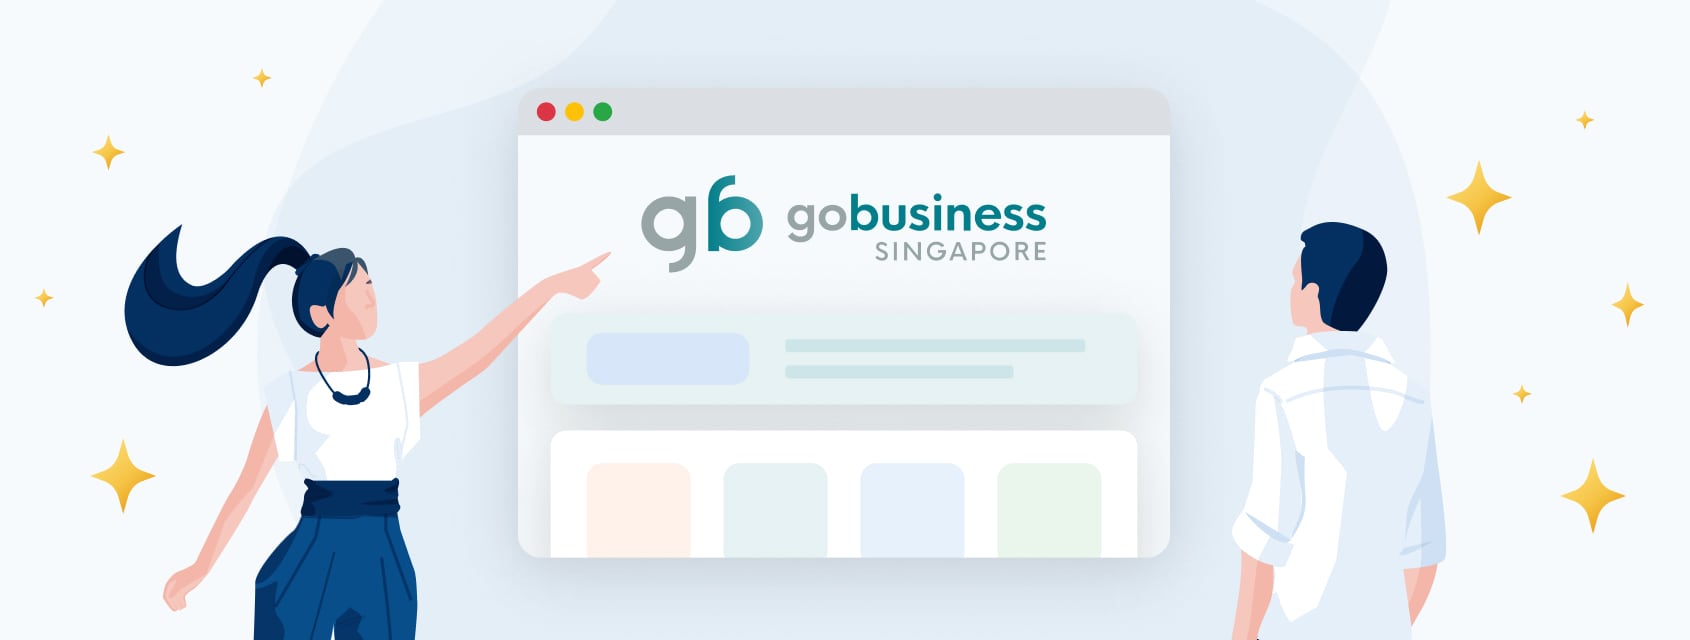 GoBusiness Dashboard Official Launch